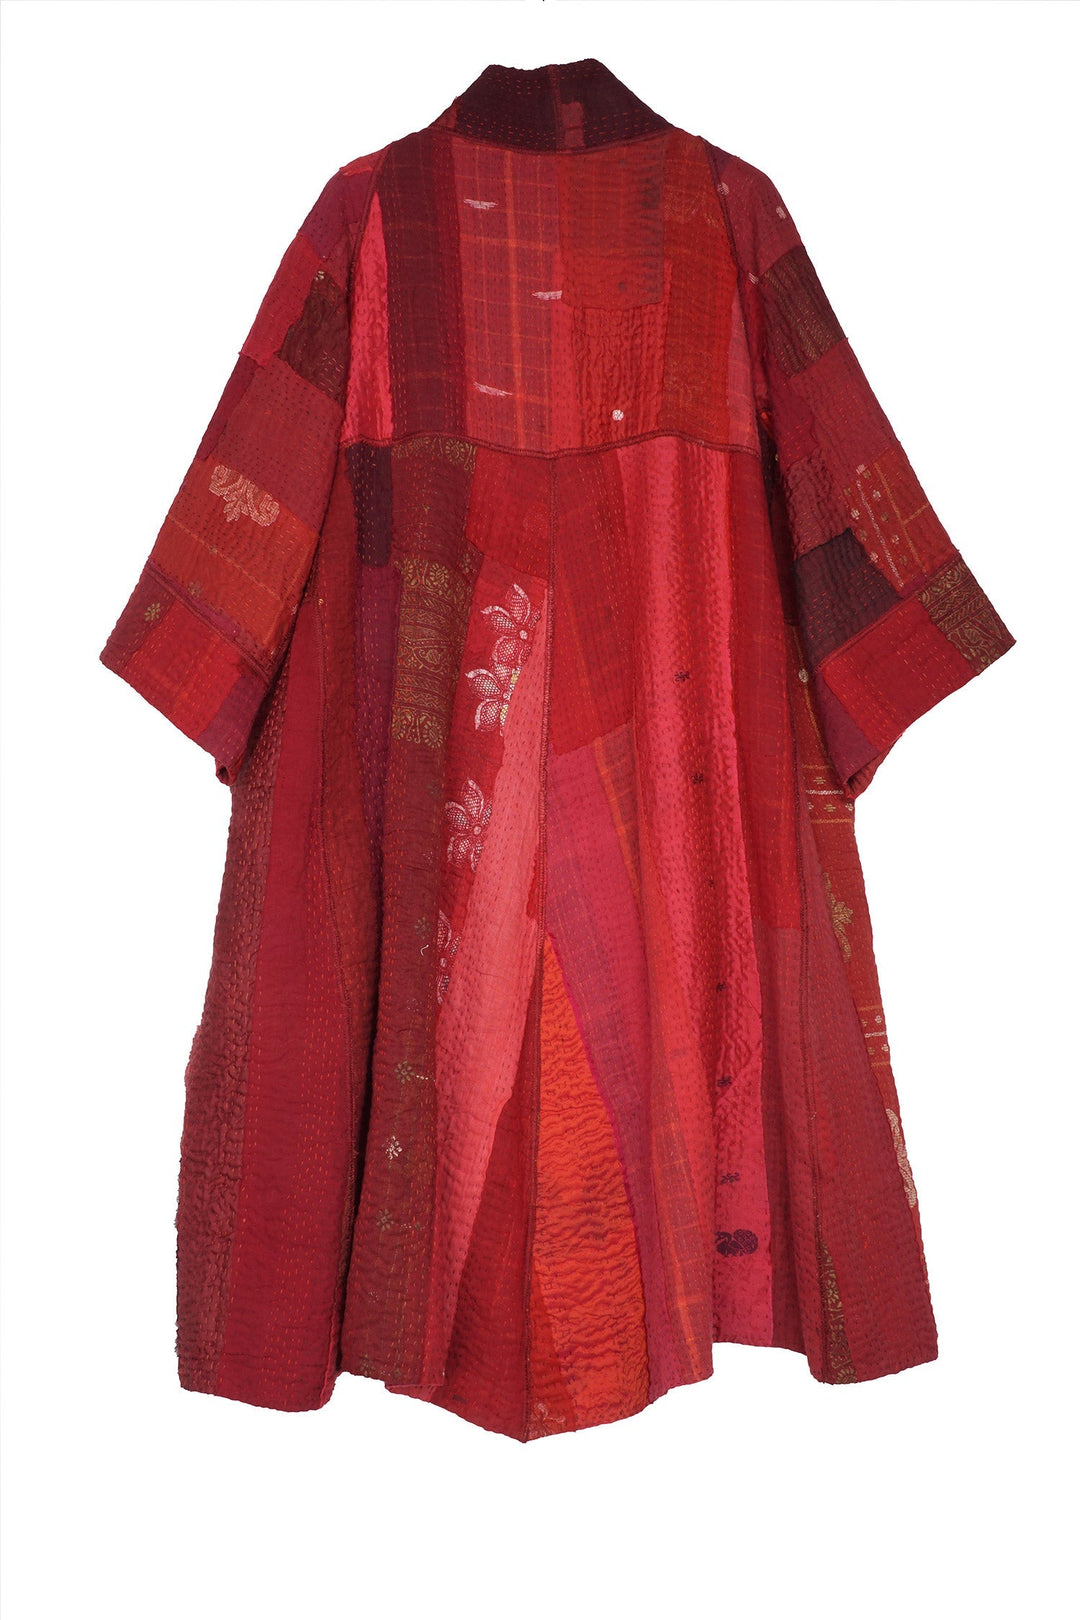 STRIPE AND CHECK COTTON SILK PATCH KANTHA 3/4 SLV. A-LINE DUSTER - ss4324-red -